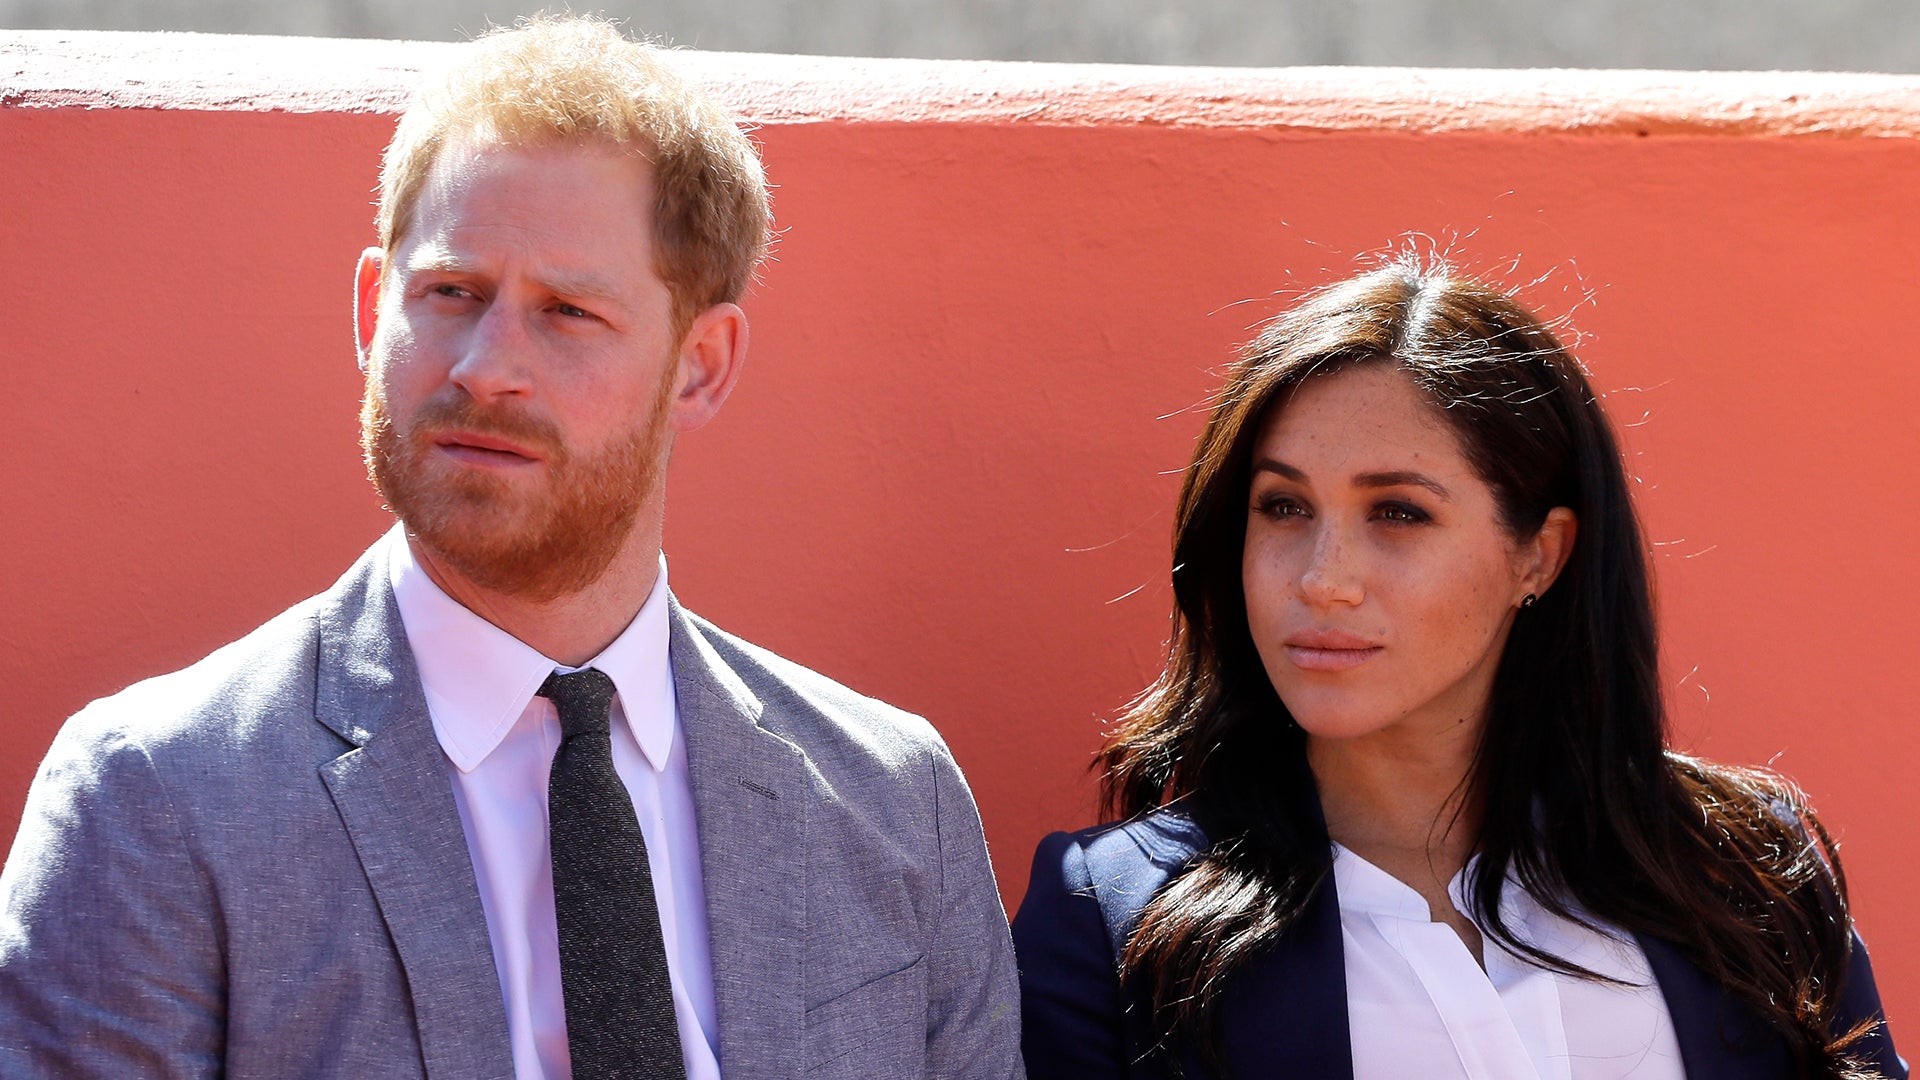 Prince Harry and Meghan Markle Celebrate 5th Wedding Anniversary Amid Car Chase Controversy